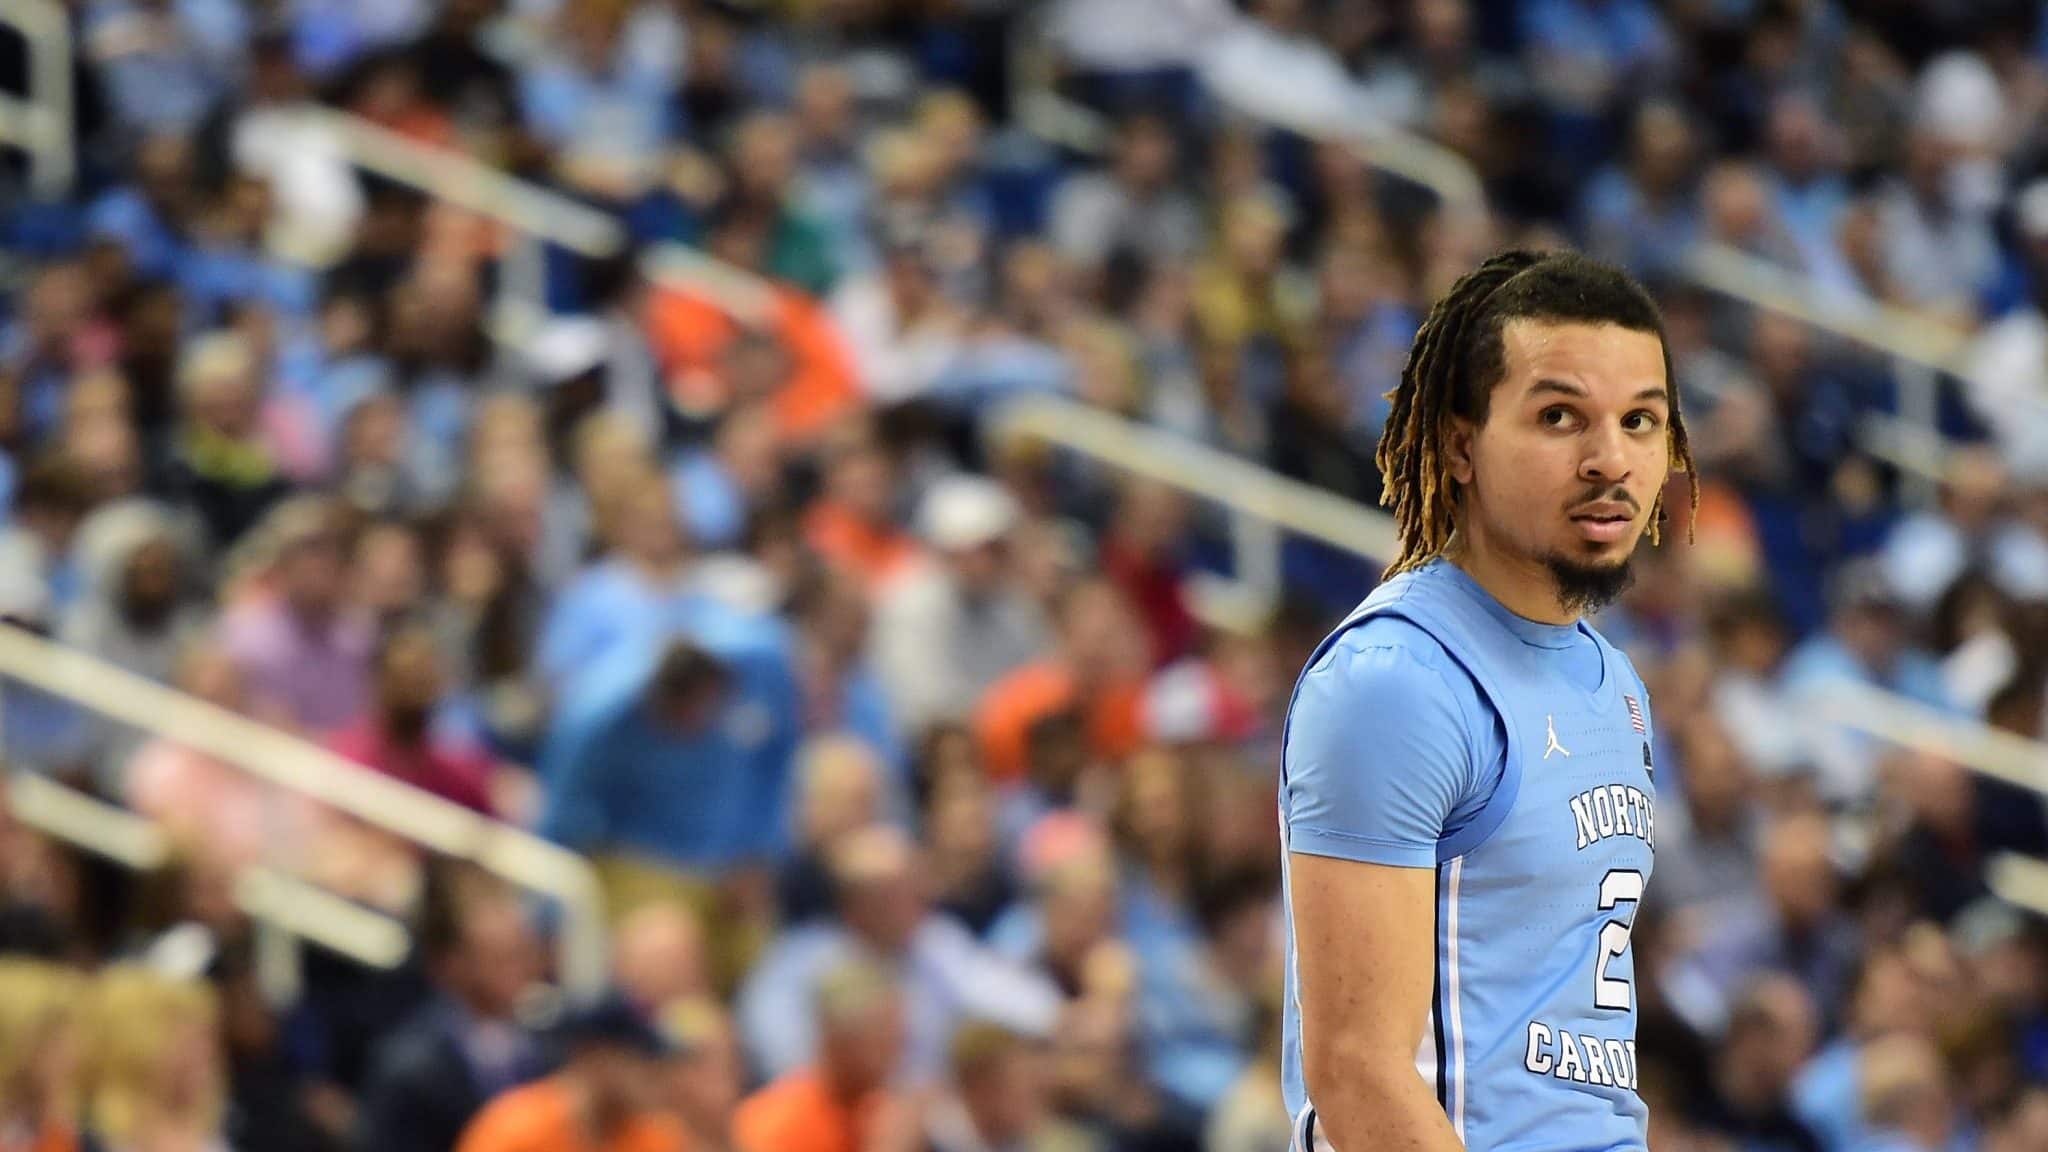 GREENSBORO, NORTH CAROLINA - MARCH 11: Cole Anthony #2 of the North Carolina Tar Heels looks on during their game against the Syracuse Orange in the second round of the 2020 Men's ACC Basketball Tournament at Greensboro Coliseum on March 11, 2020 in Greensboro, North Carolina.